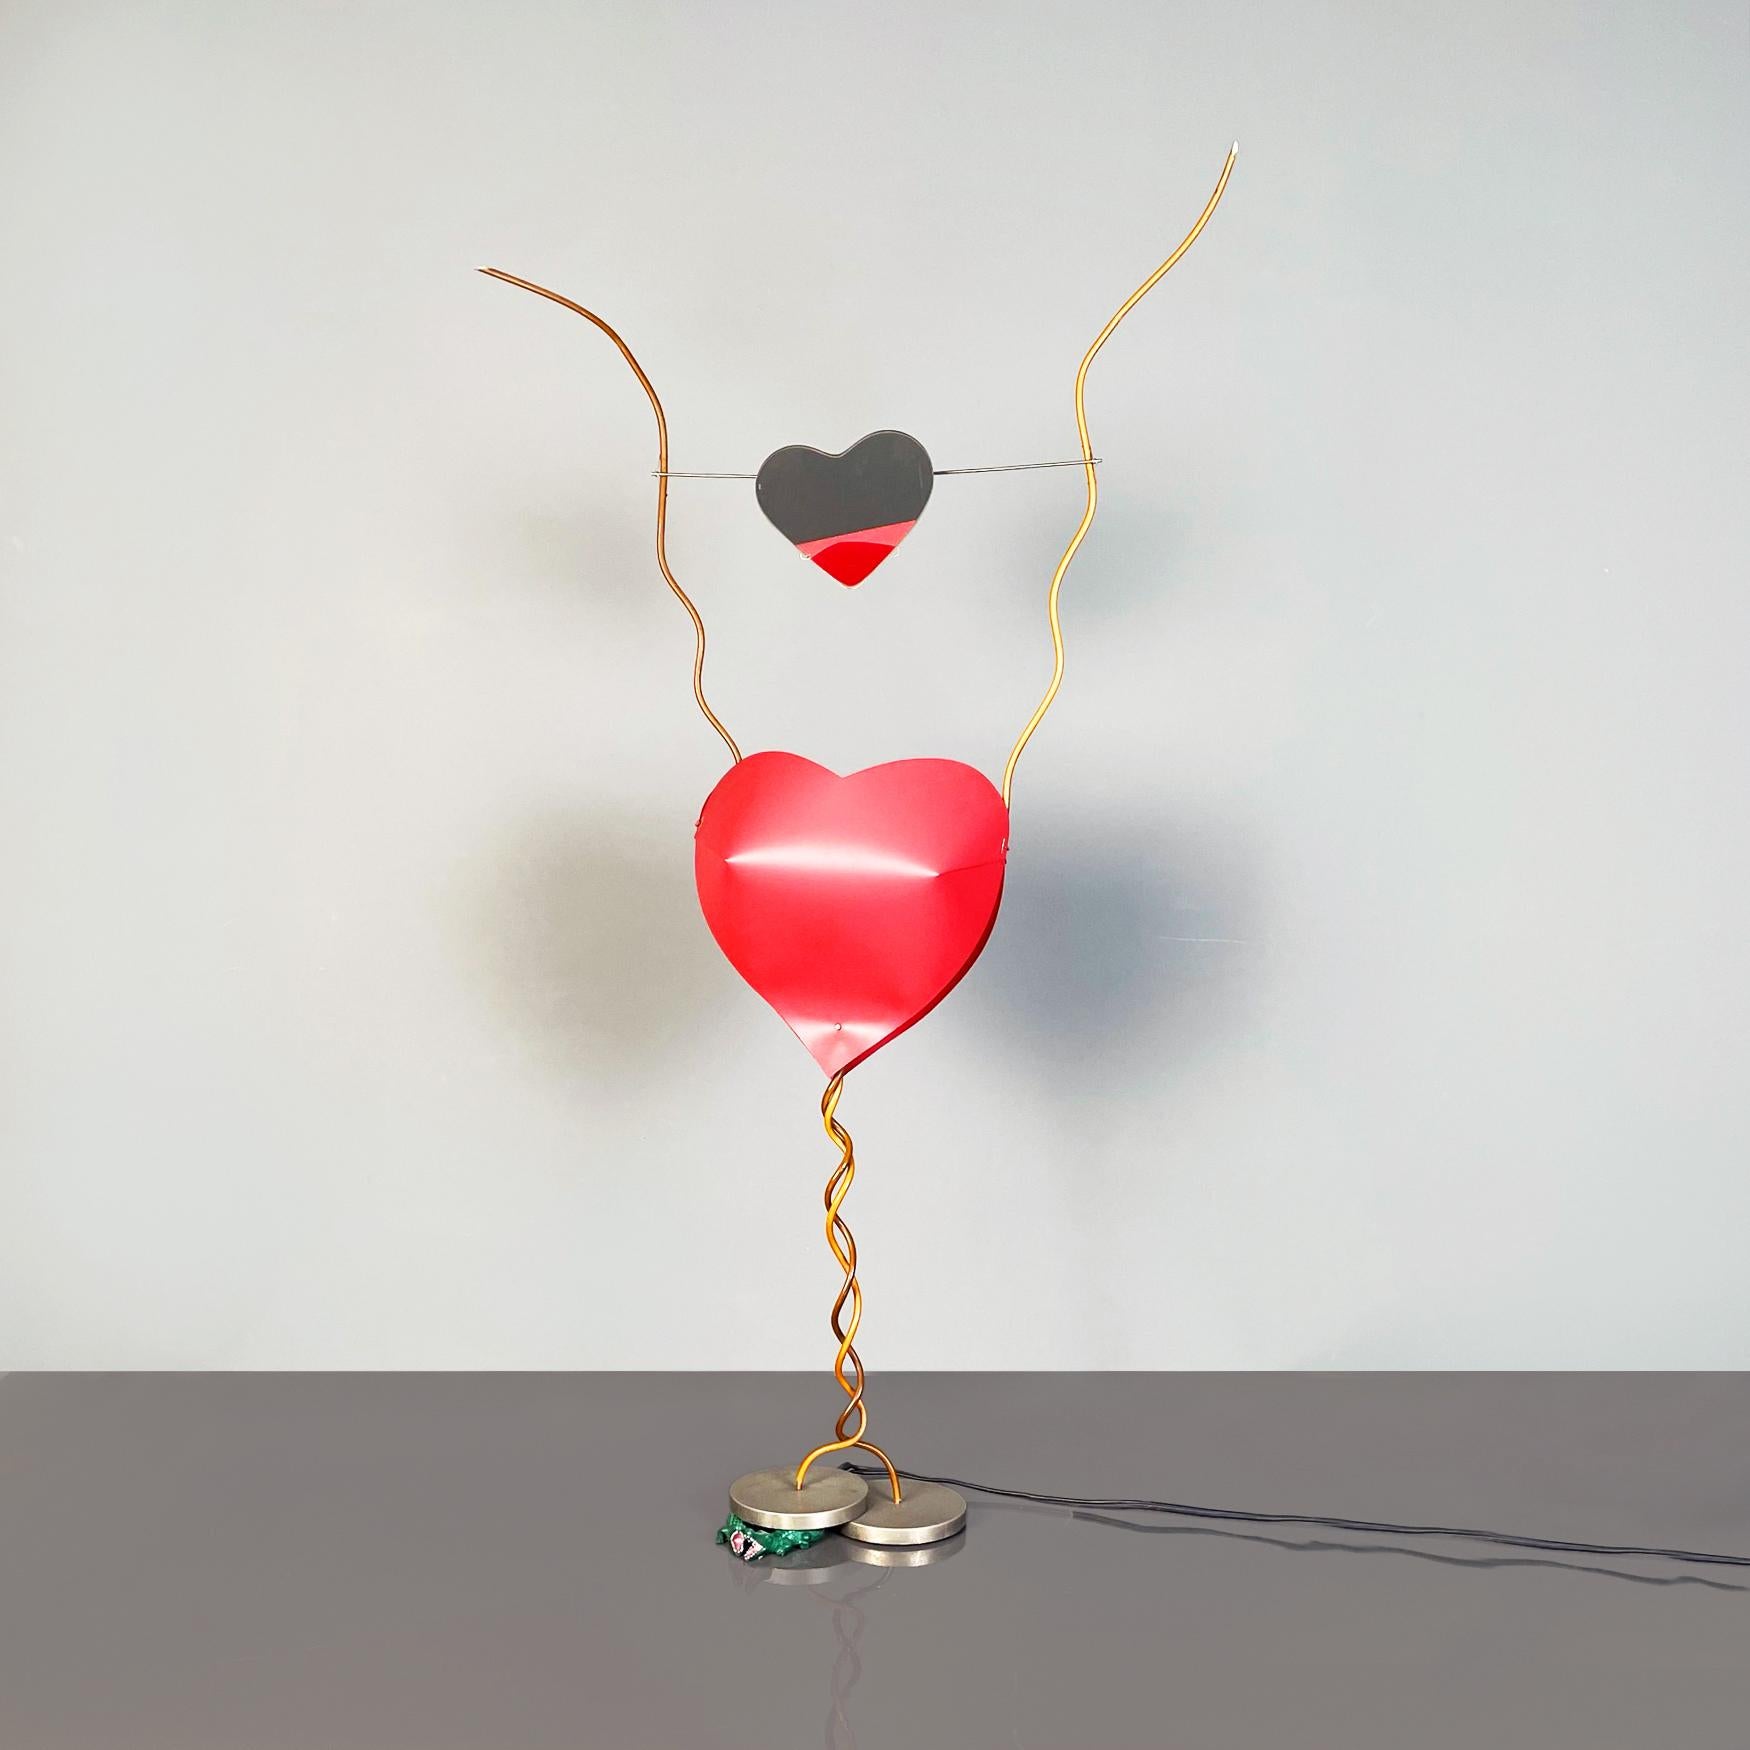 German modern table lamp mod. One From The Heart by Ingo Maurer, 1980s
Elegant and fantastic table lamp mod. One From The Heart with plastic heart-shaped diffuser. Above the diffuser there is a suspended and swiveling heart-shaped mirror, with